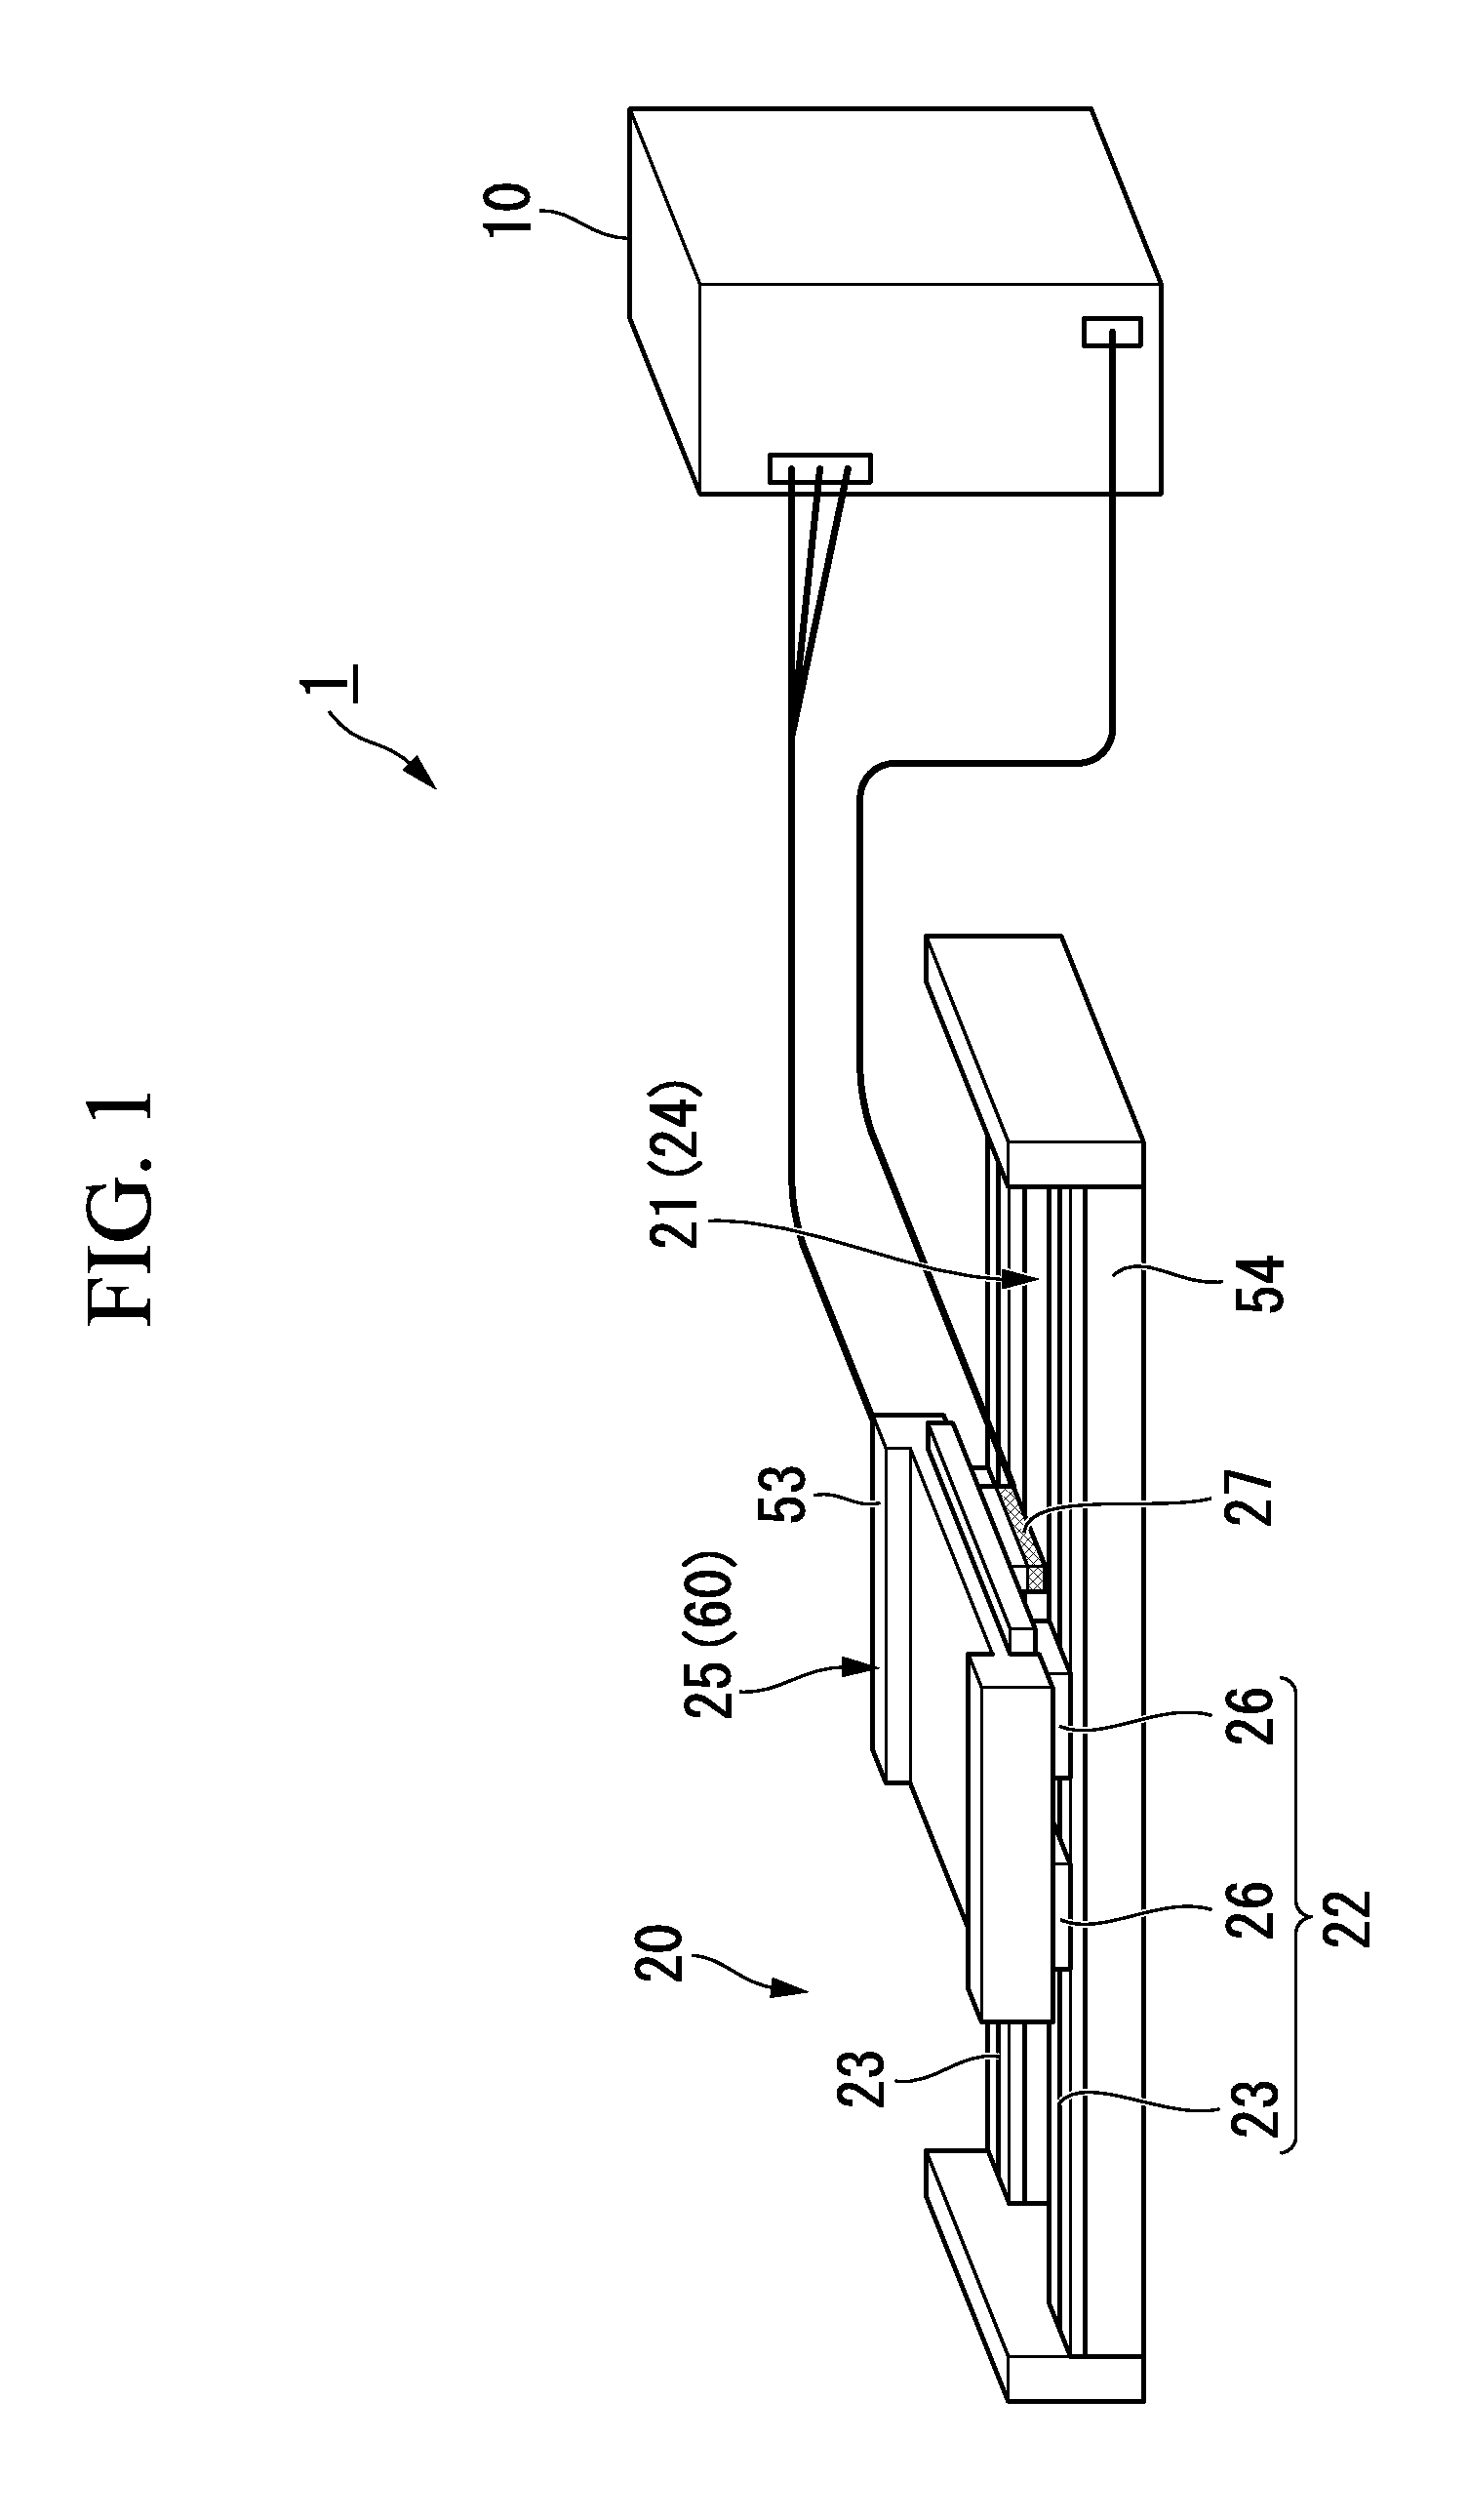 Control apparatus for linear motor, and linear motor apparatus